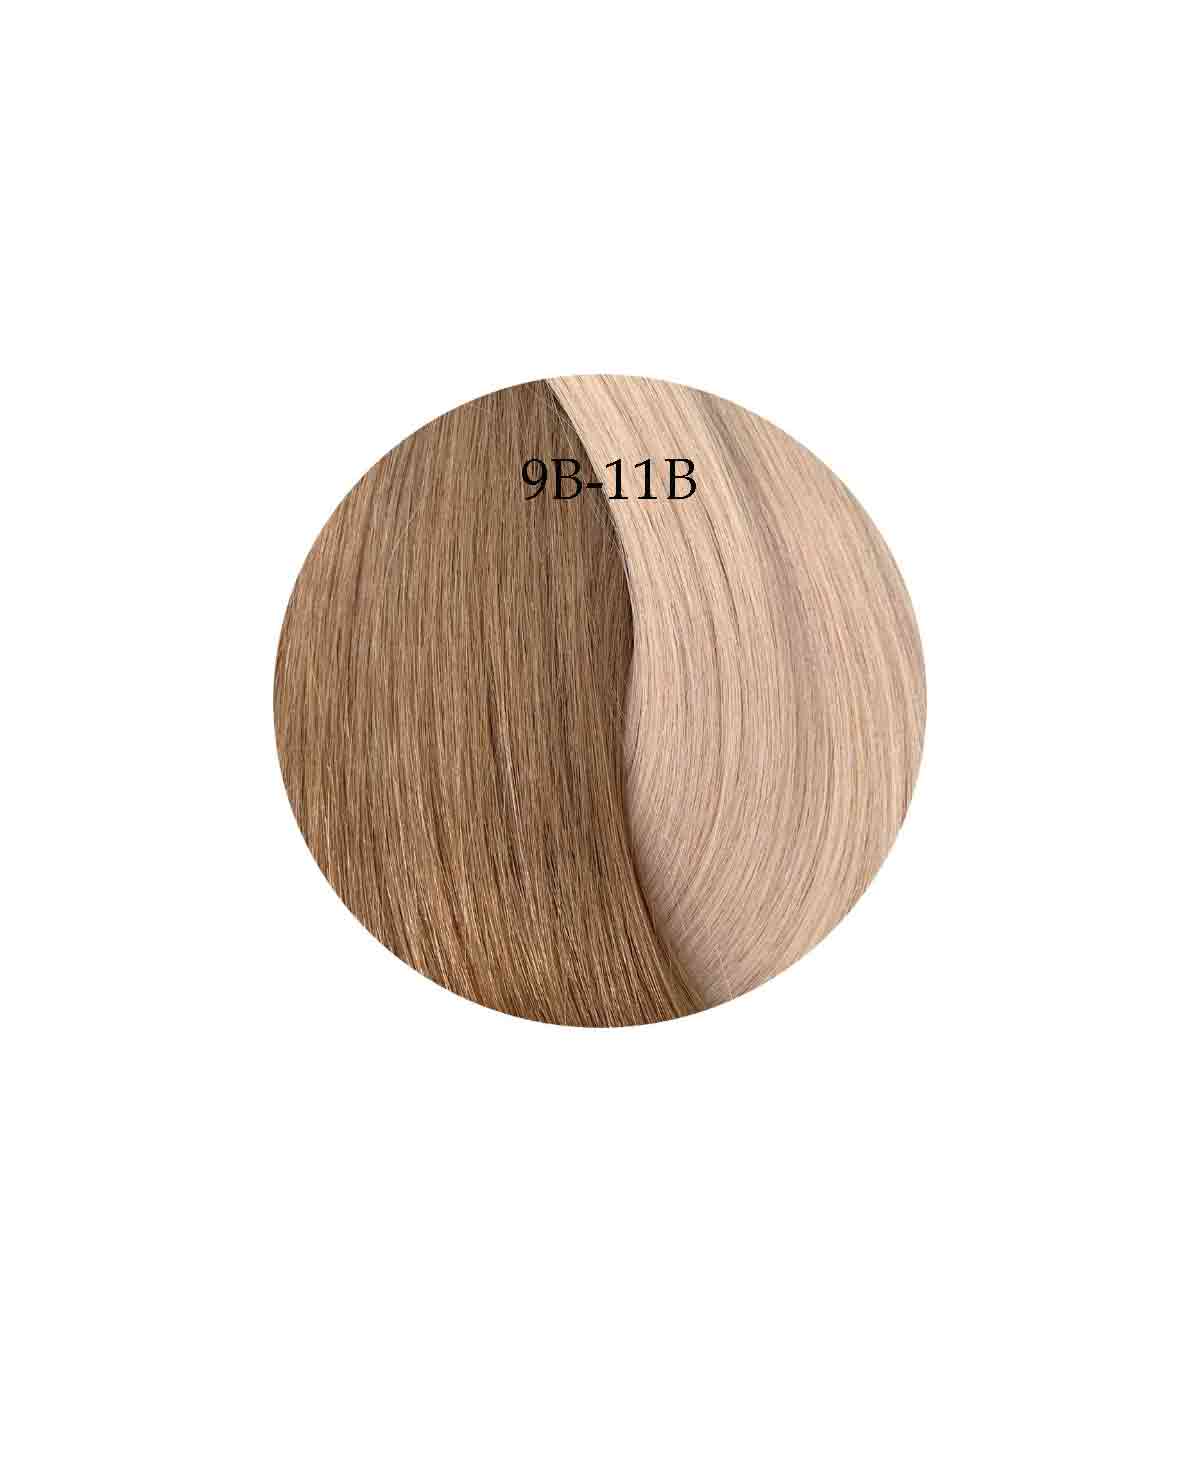 Showpony 45-50cm (20") Skin Weft Extensions - Ombre - 9B-11B Cool Soft Blonde